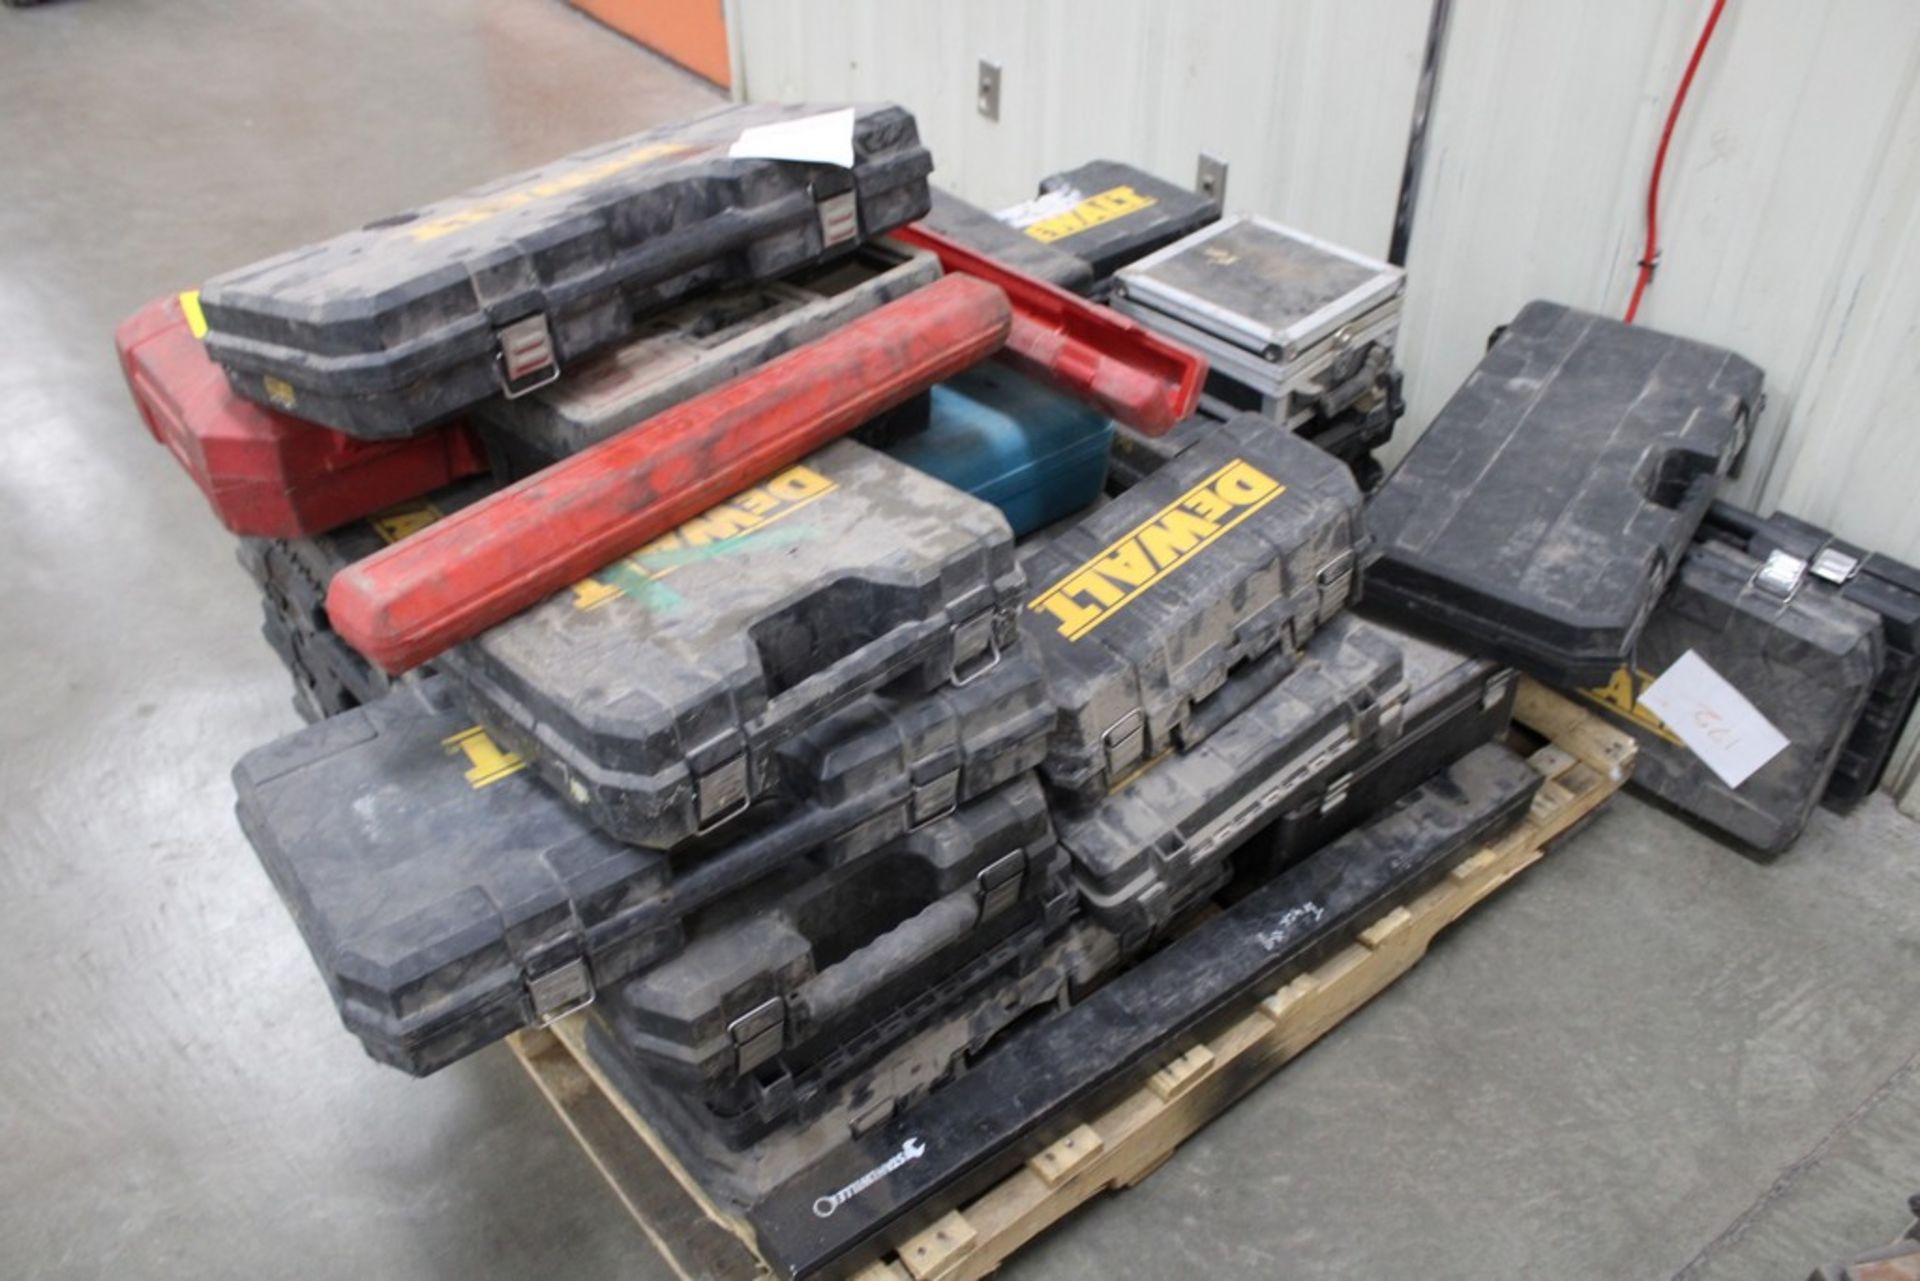 LARGE ASSORTEMENT OF PLASTIC TOOL BOXES, ALL EMPTY - Image 2 of 2